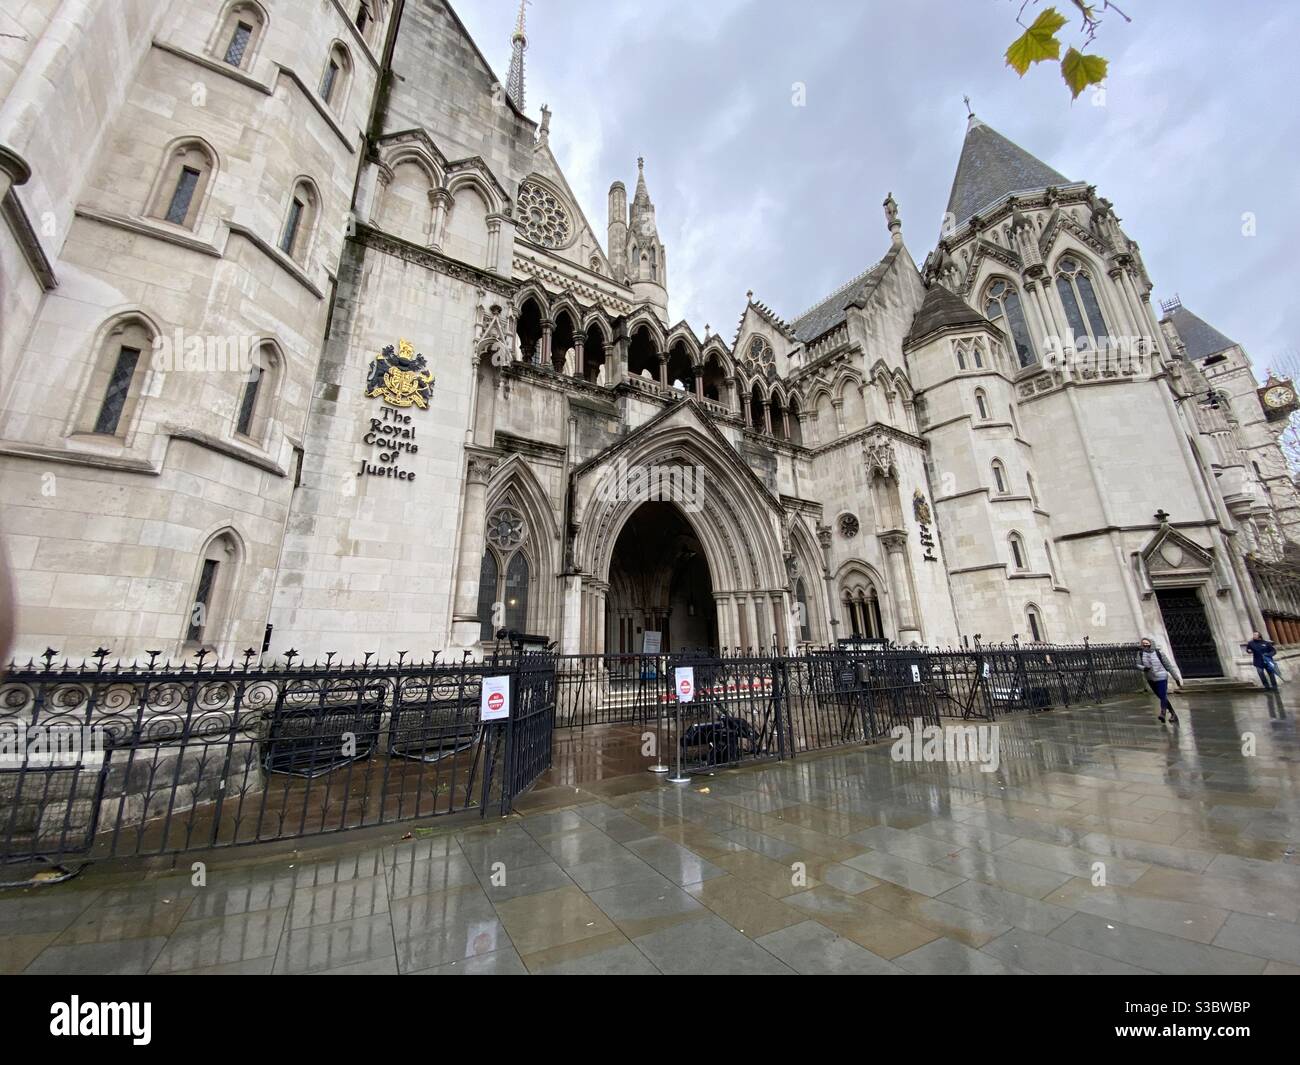 The royal court of justice London Stock Photo